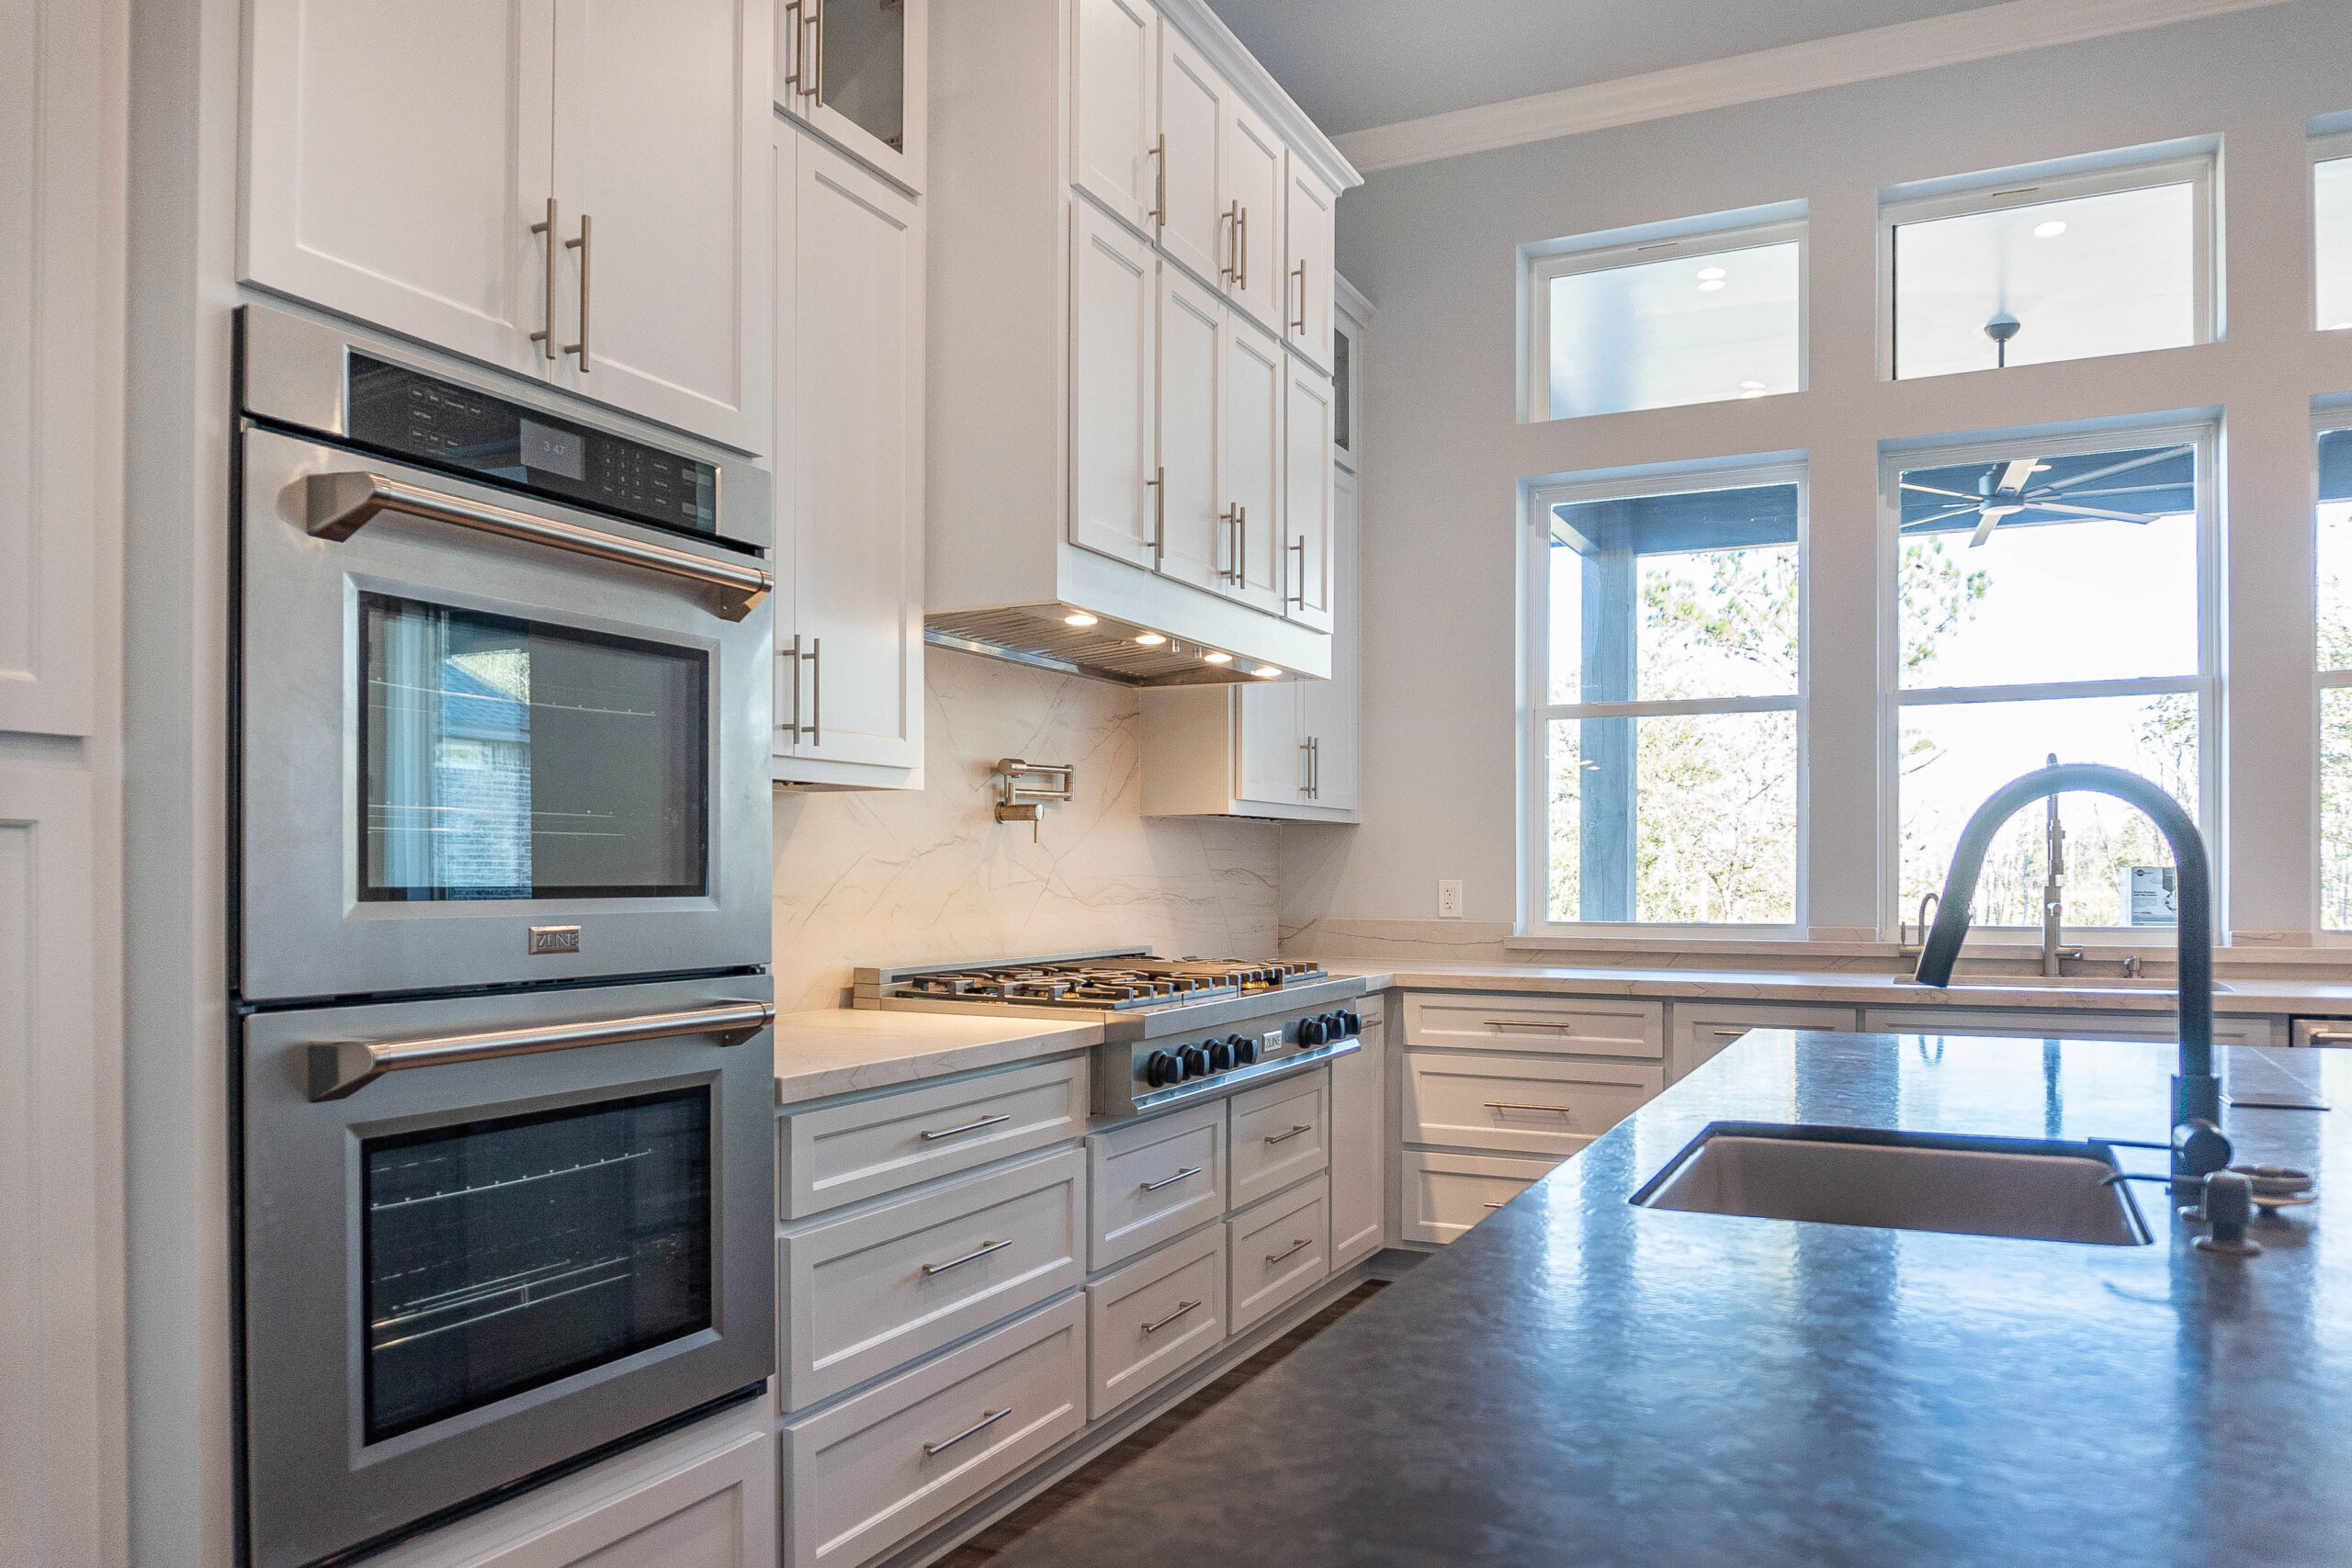 Boyt home modern kitchen white shaker style cabinets with gold hardware white marble backsplash built in double oven